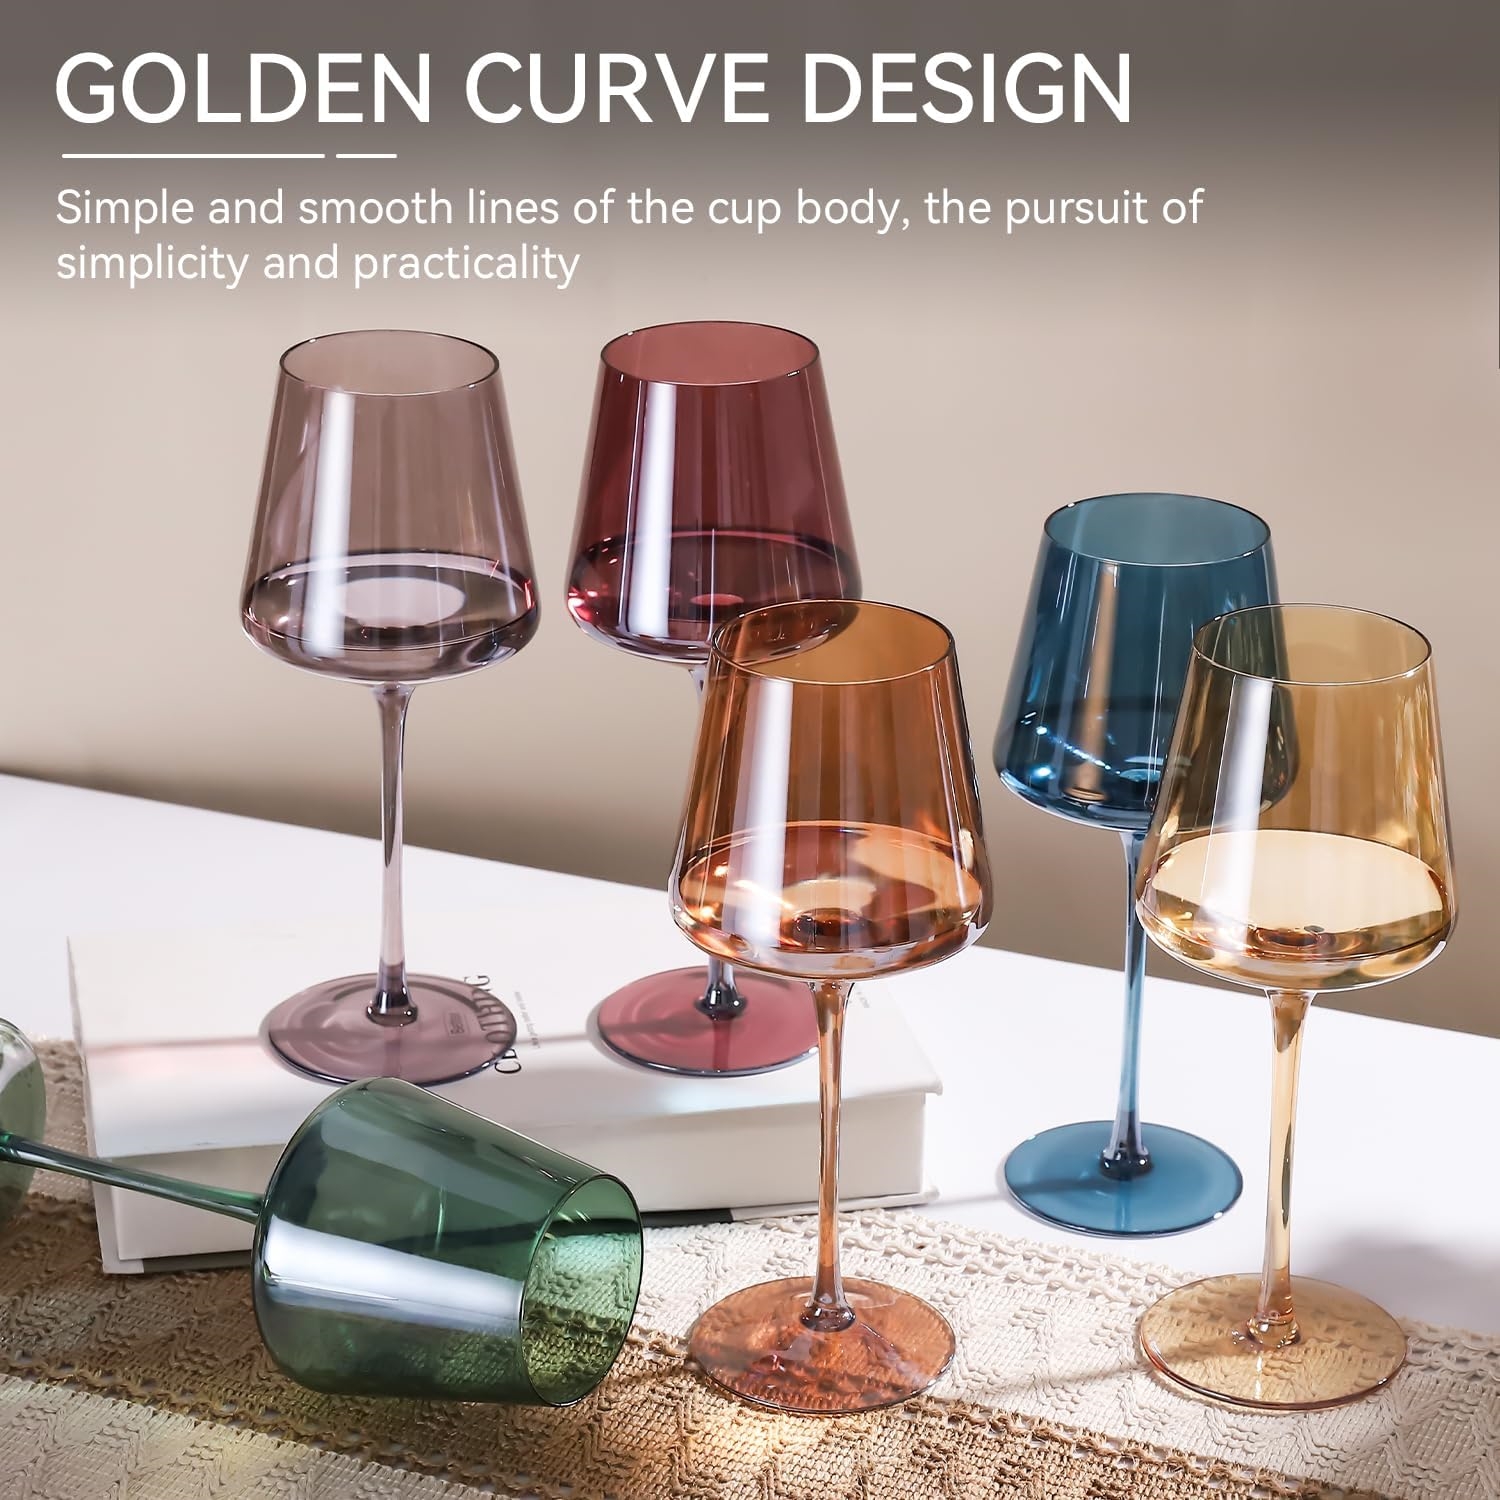 Colorful Wine Glass Set of 6 Unique multi-color wine glass set for wine lovers hand blown goblet